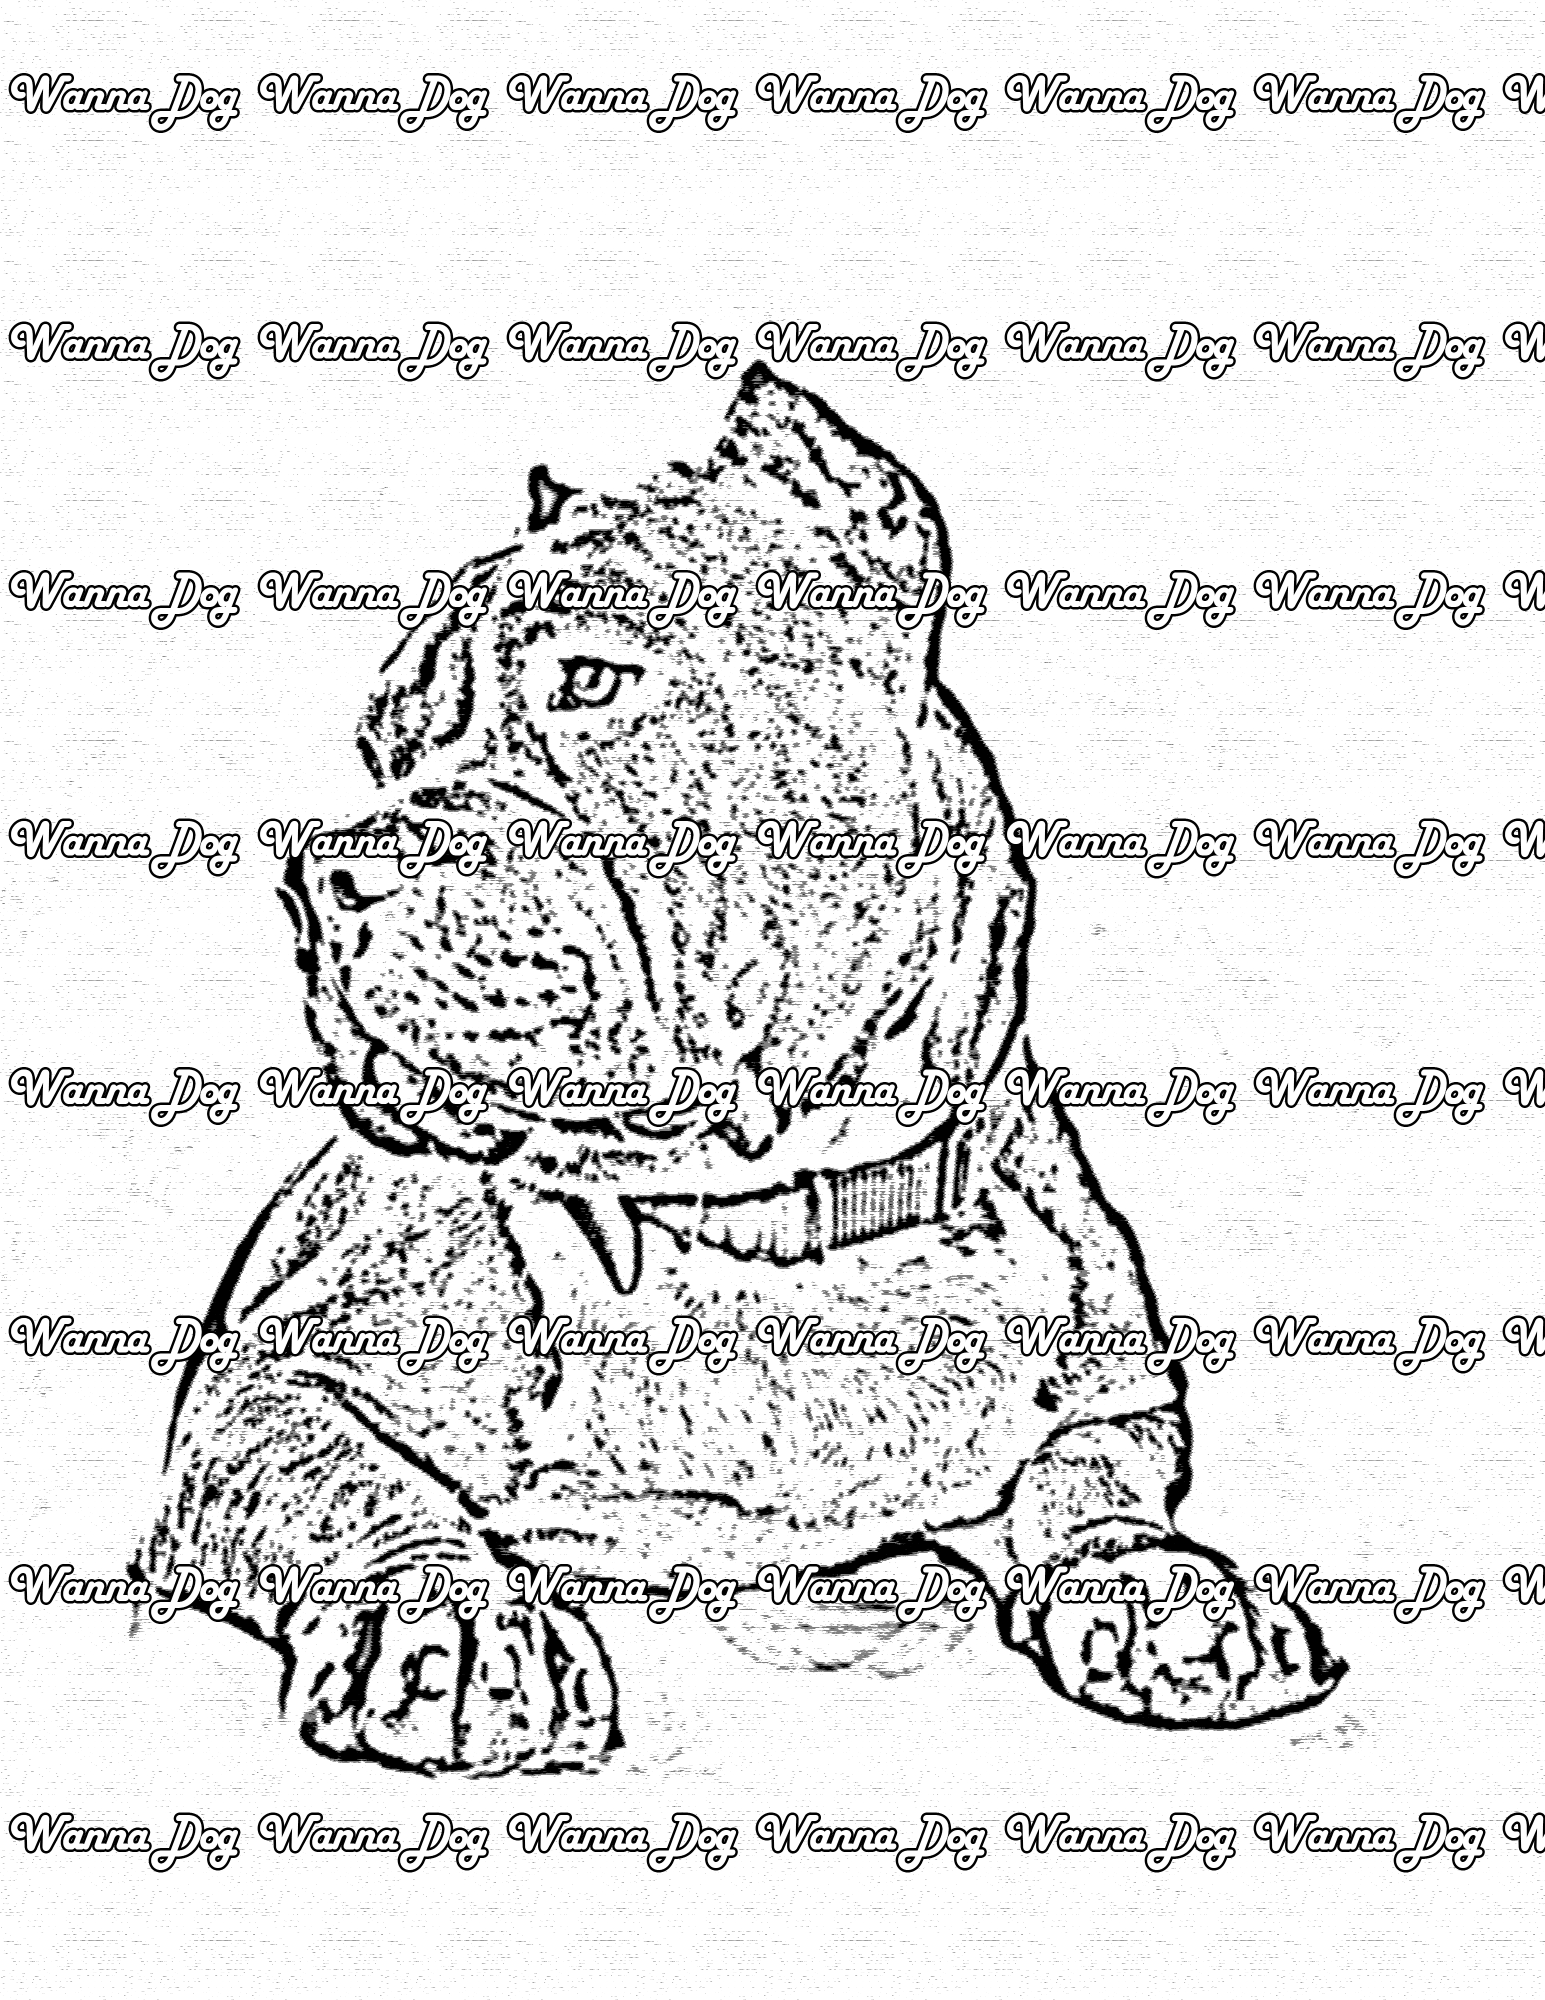 Pitbull Coloring Pages of a Pitbull sitting and looking away from the camera